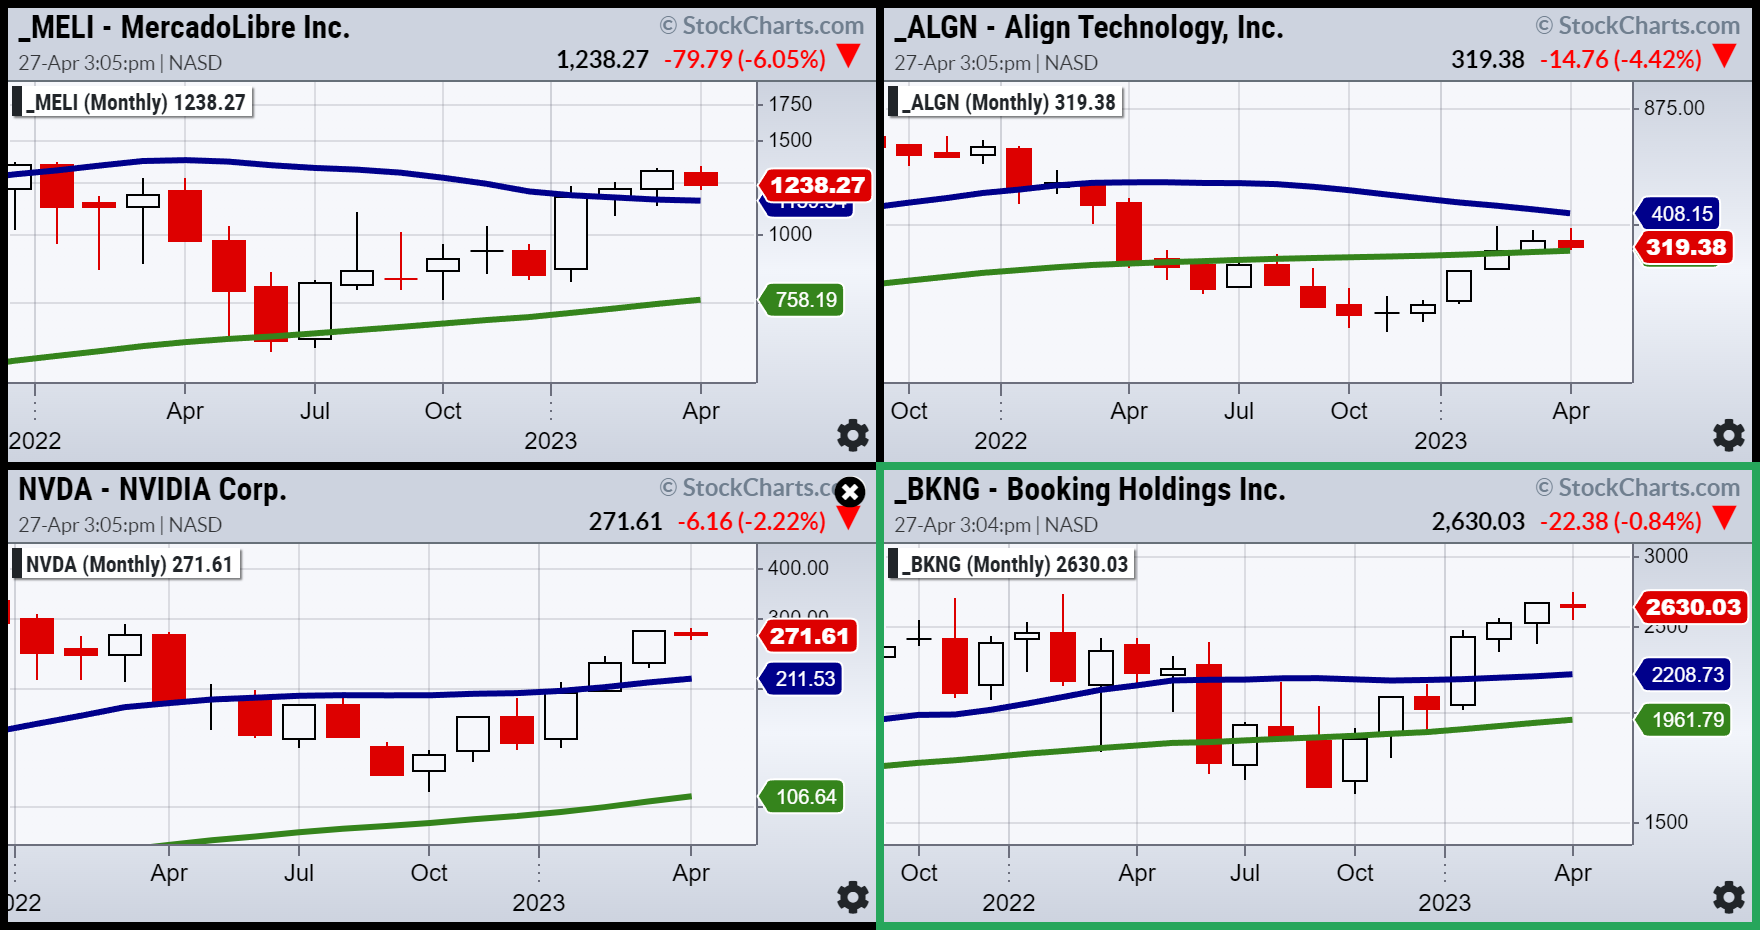 MELI-ALGN-NVDA-BKNG Monthly Charts